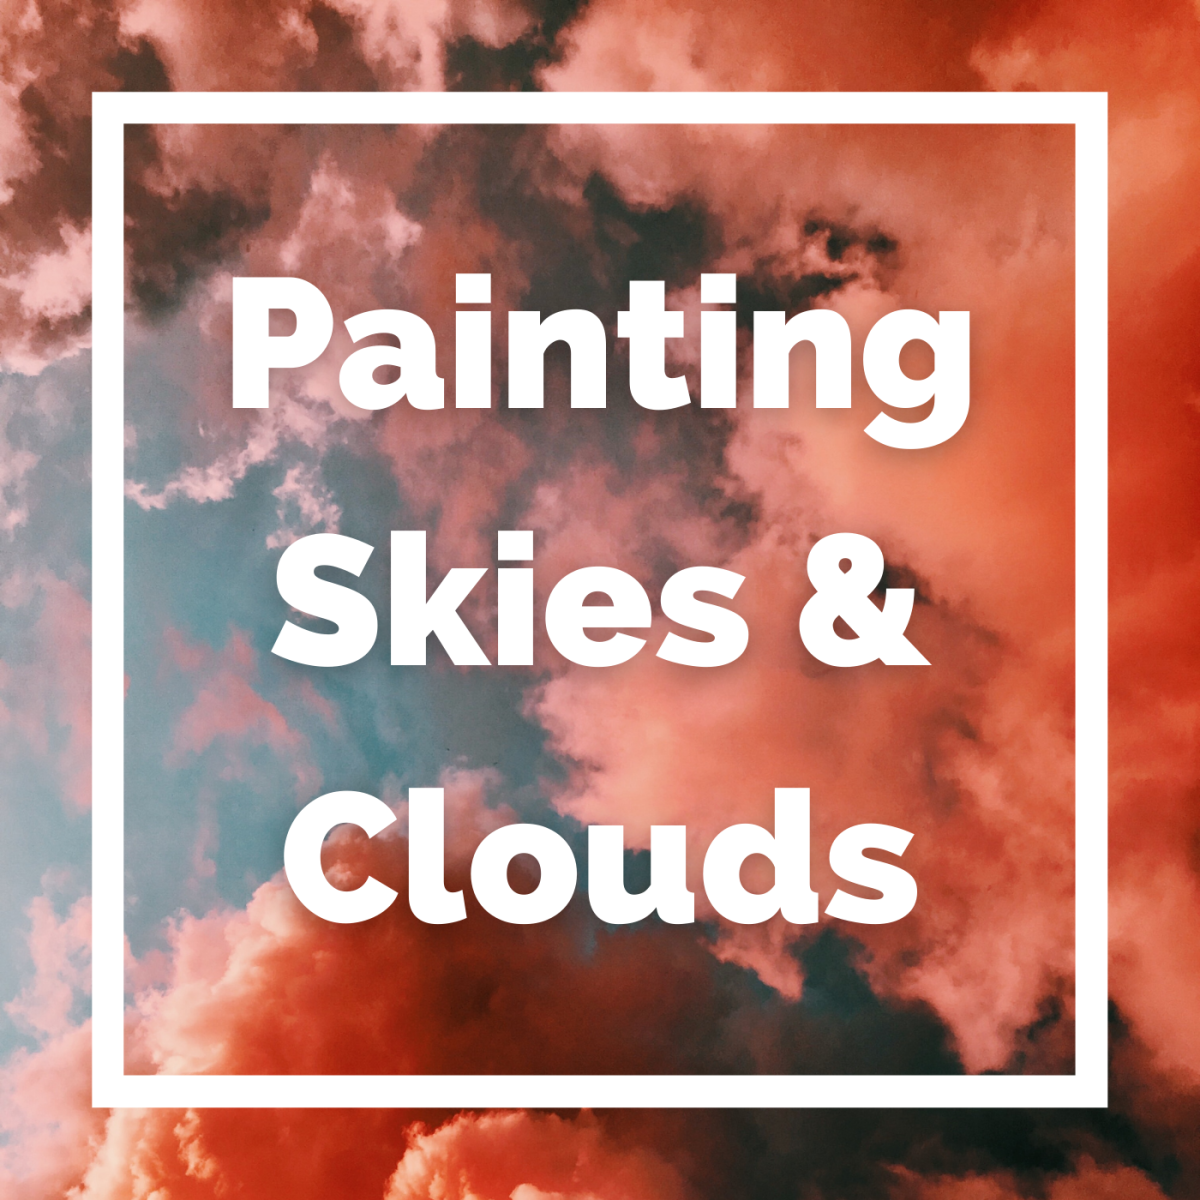 https://images.saymedia-content.com/.image/t_share/MTgzMTU0MTYwMTY4ODcxMjY0/painting-skies-sunsets.png